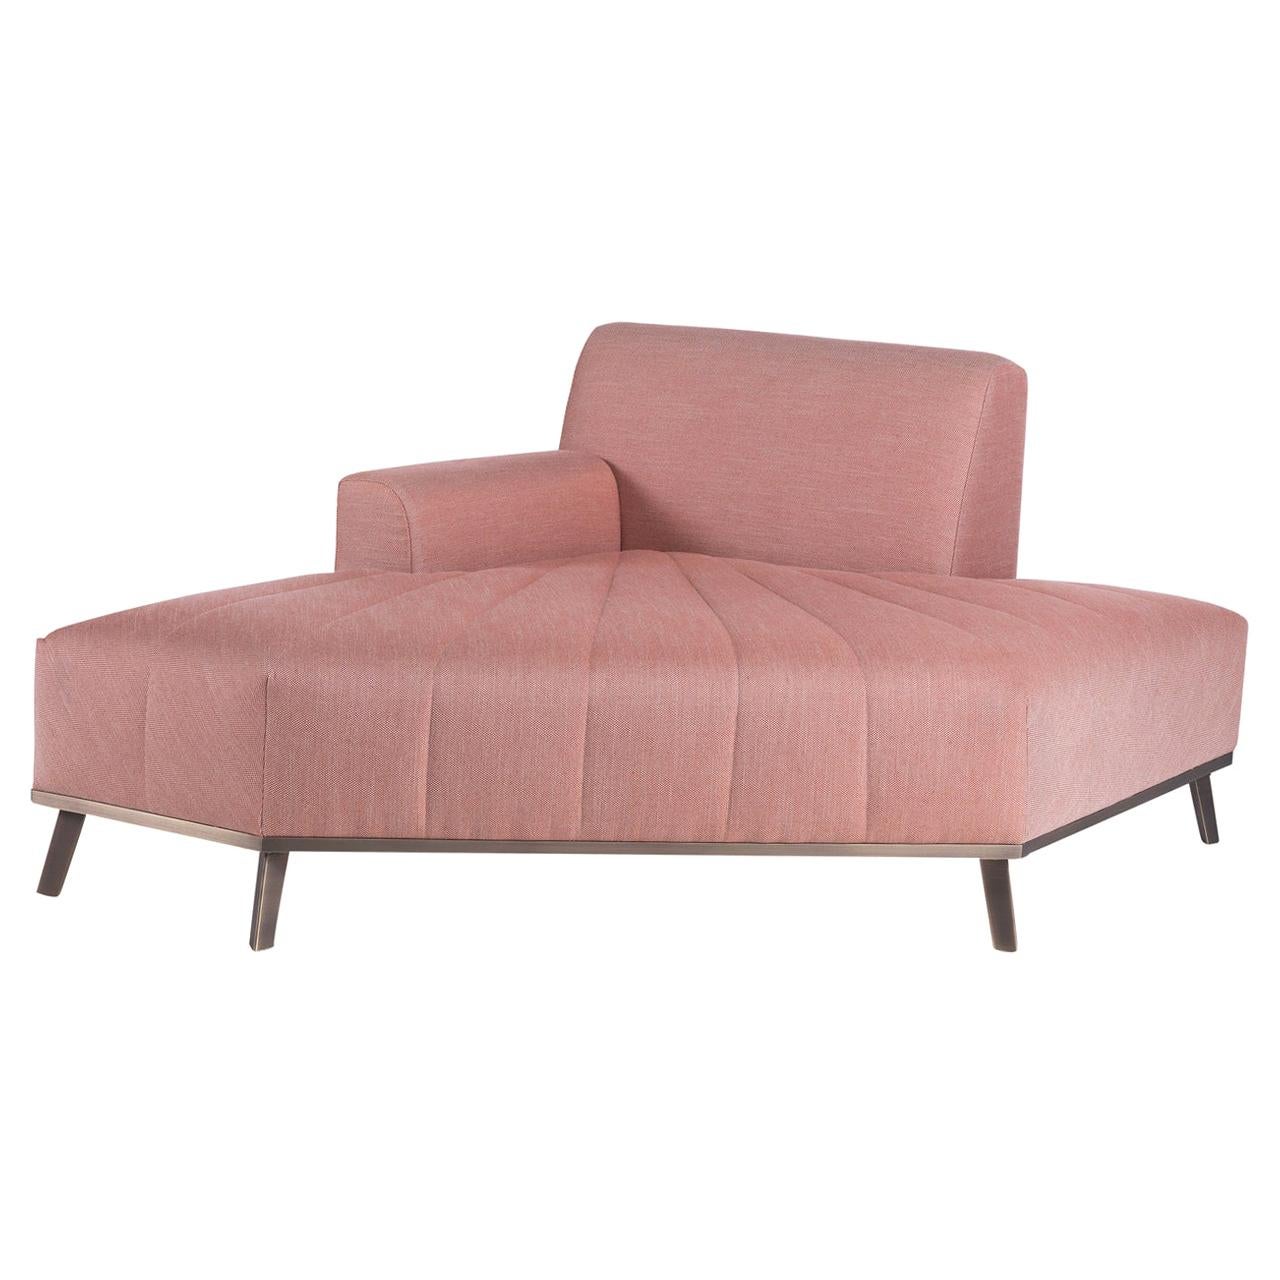 Expanding Pink Chaise Longue For Sale